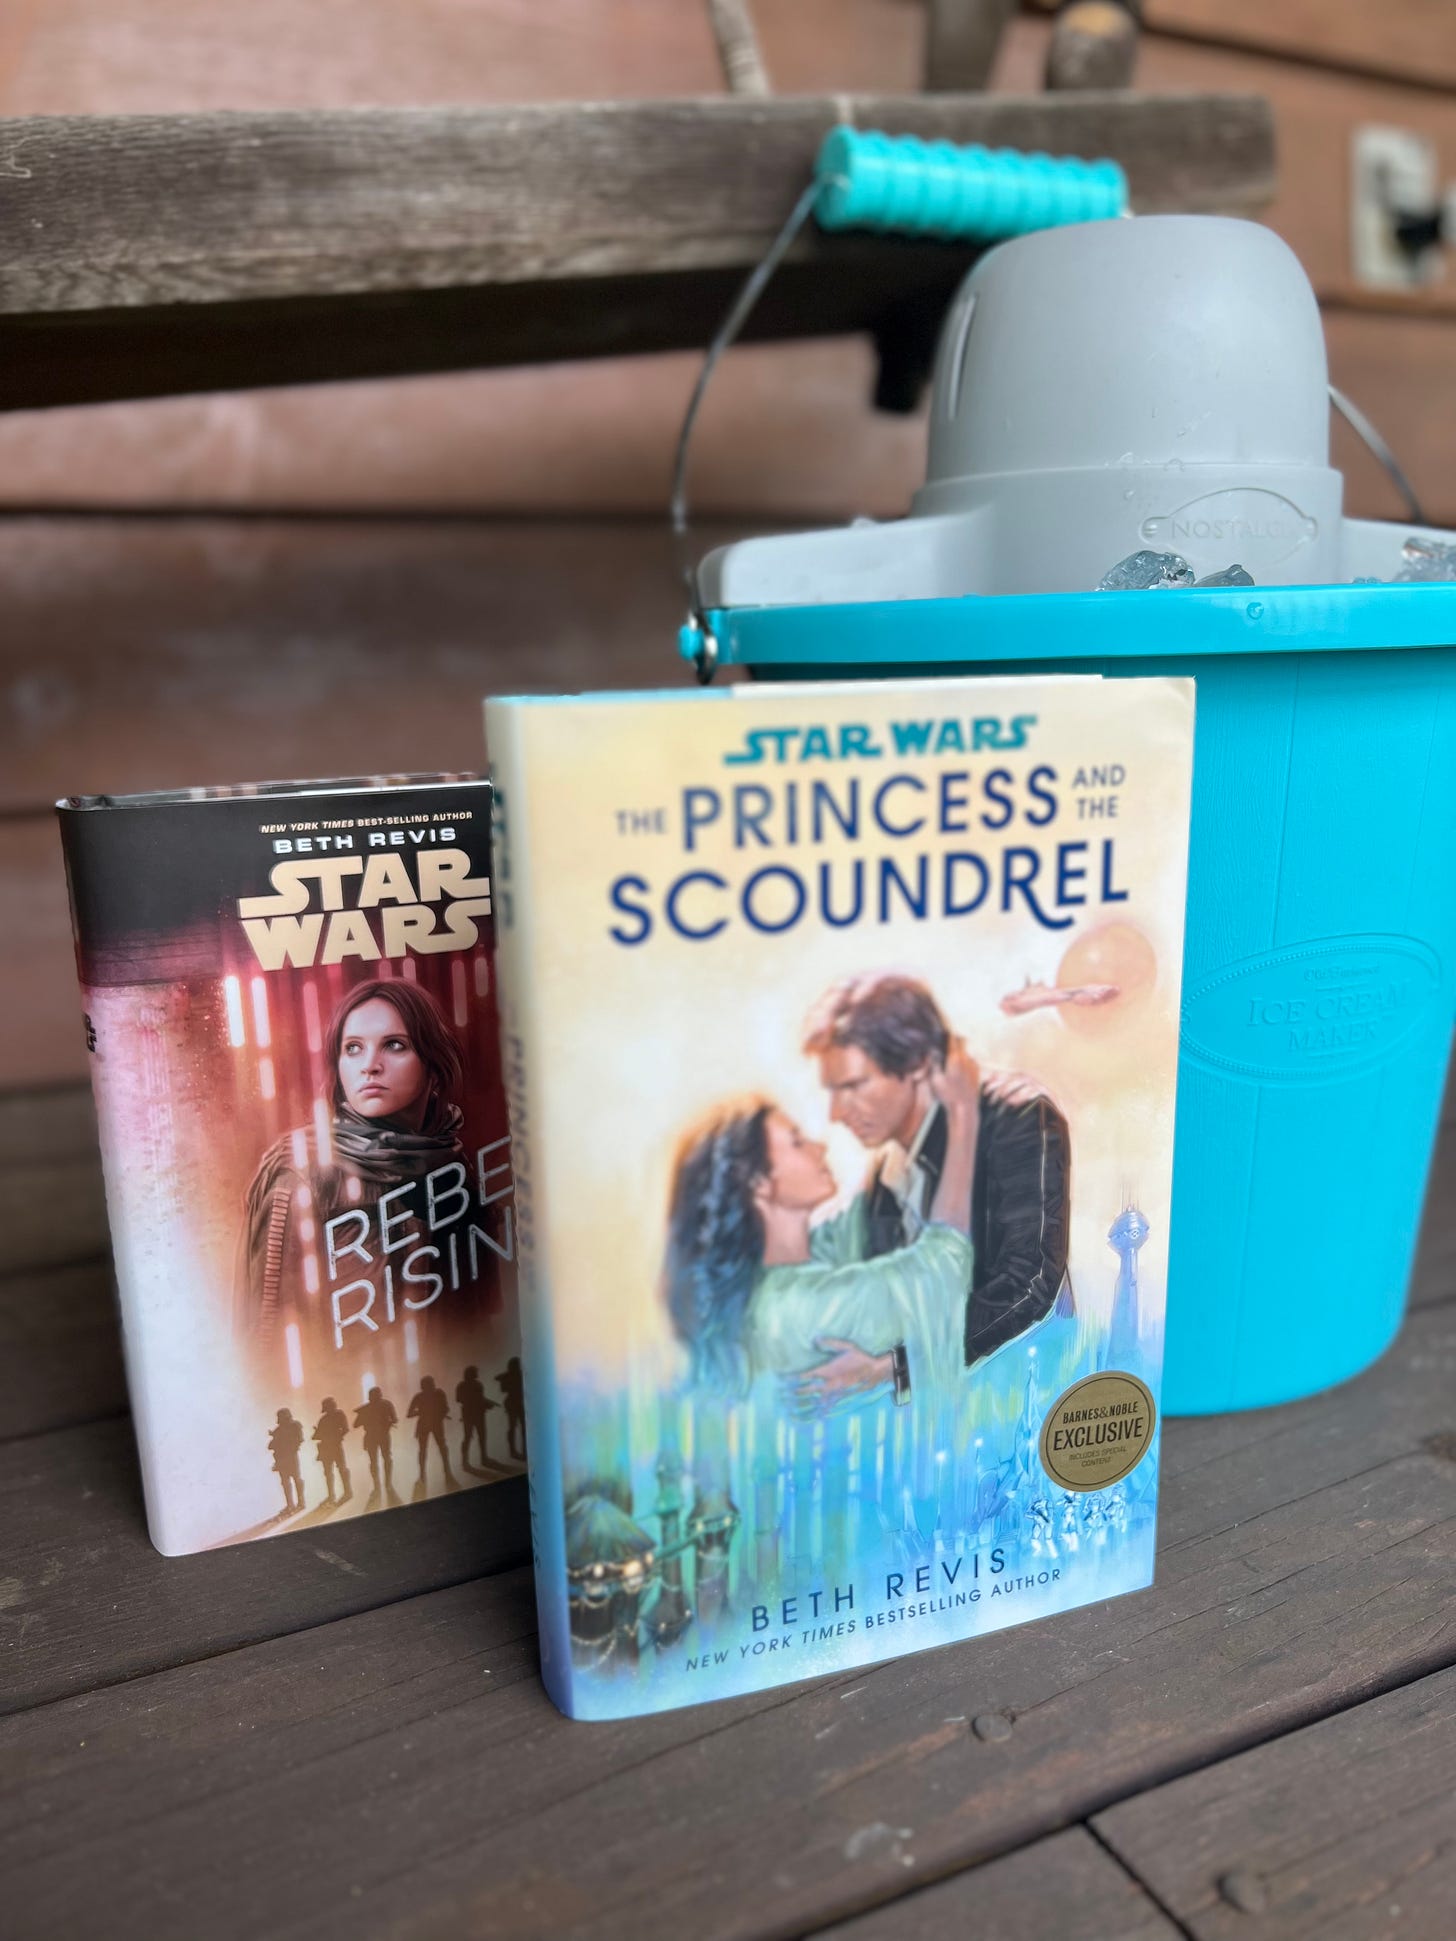 Copies of Rebel Rising and The Princess and the Scoundrel on a wooden porch in front of a blue ice cream maker